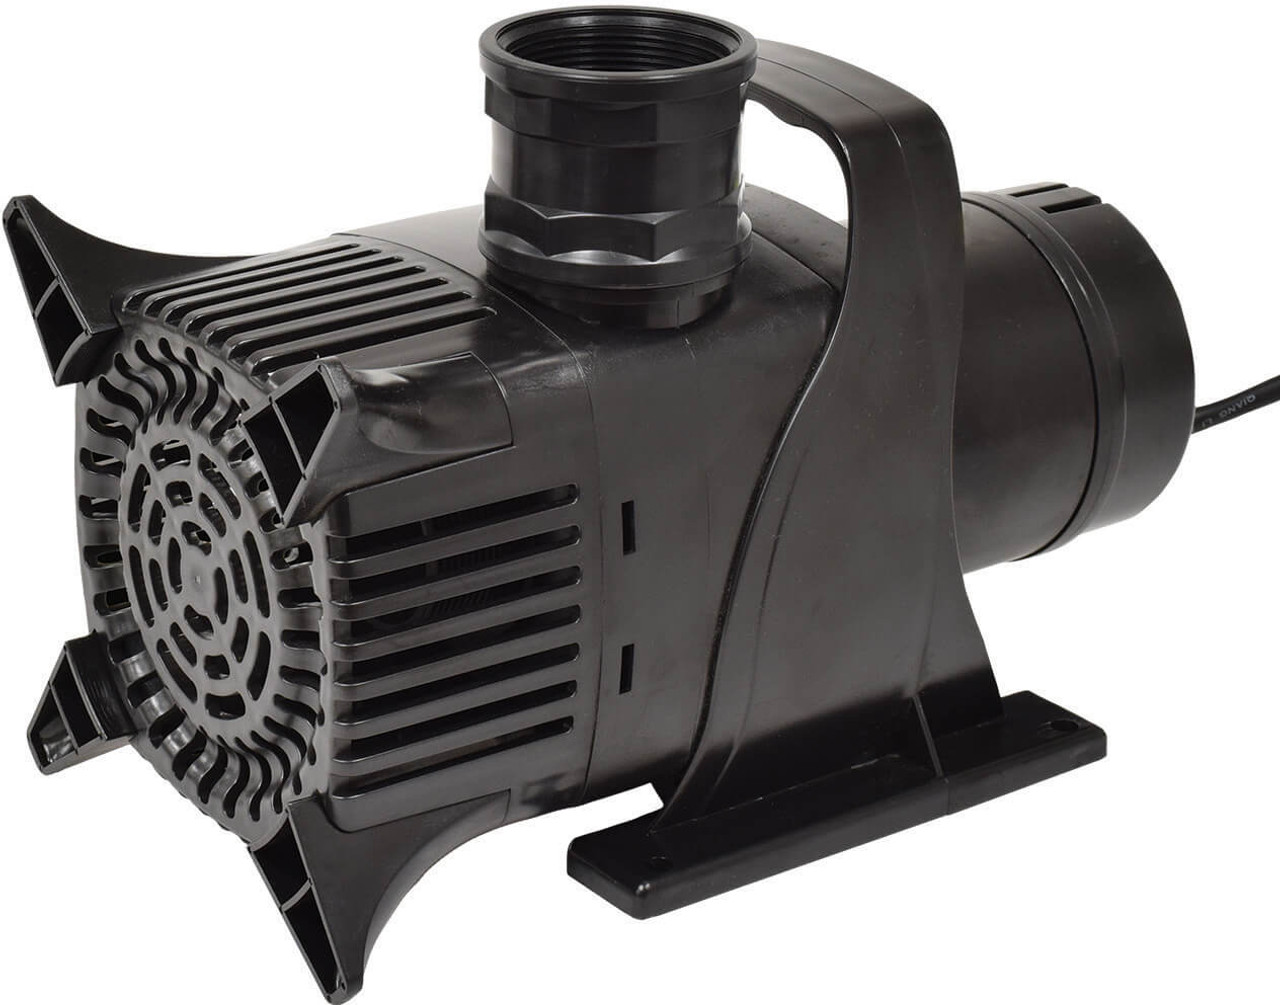 EasyPro Asynchronous Submersible Mag Drive Pump - 5360 gph